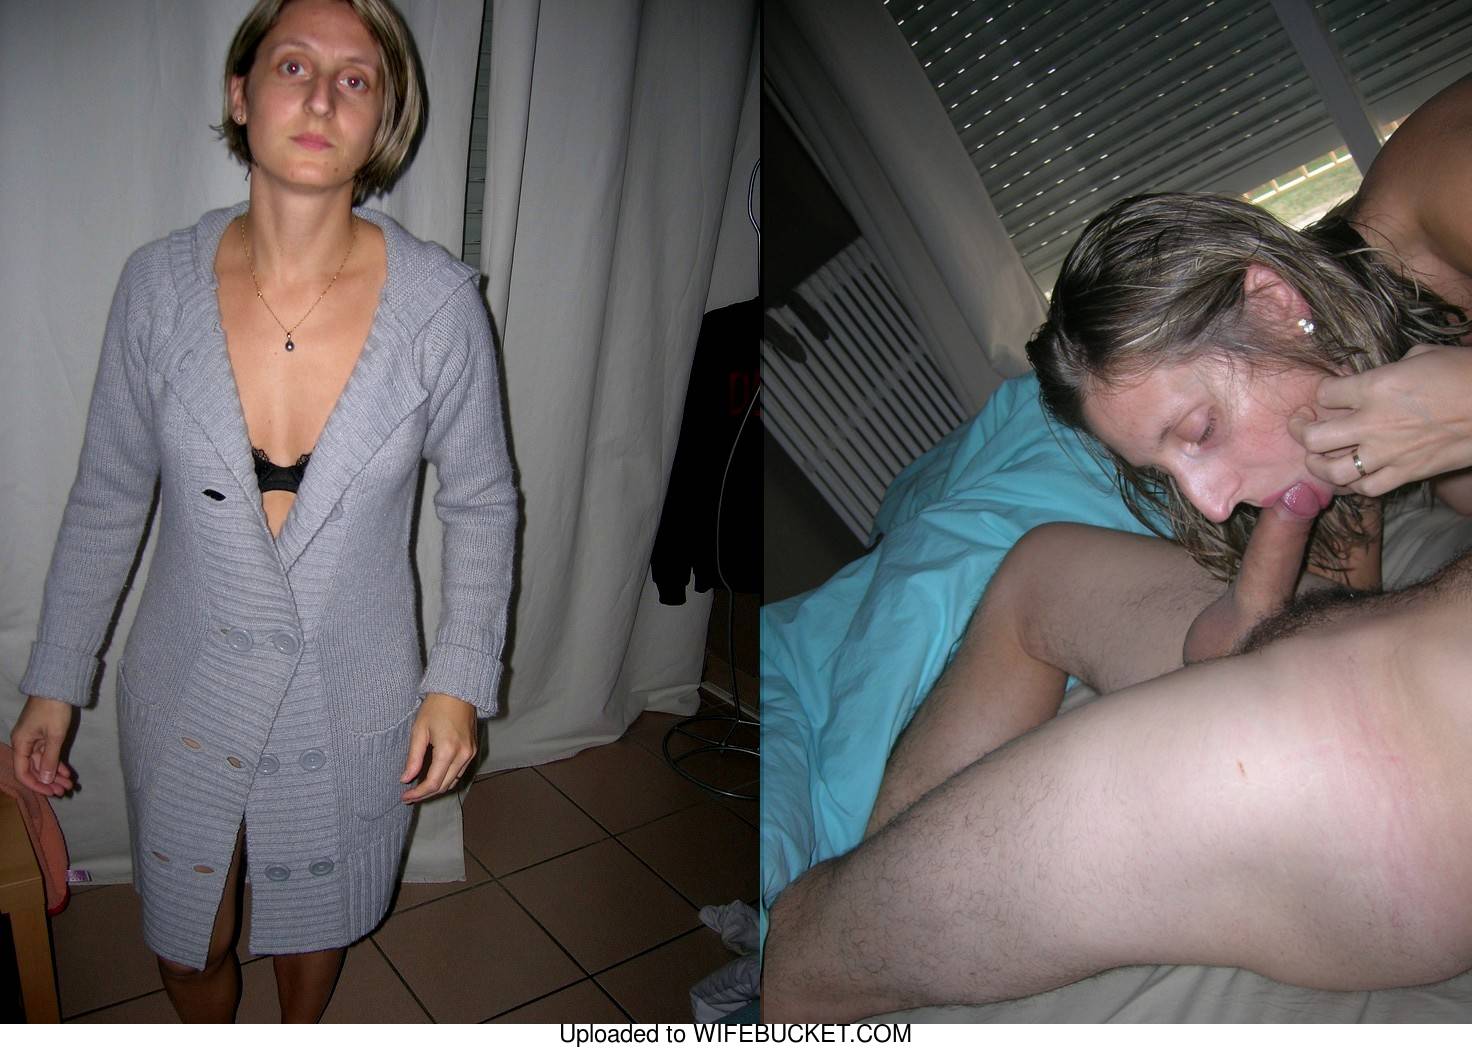 40 (yes, FOURTY) before-after blowjobs pics exposing real wives from our  archive! â€“ WifeBucket | Offical MILF Blog